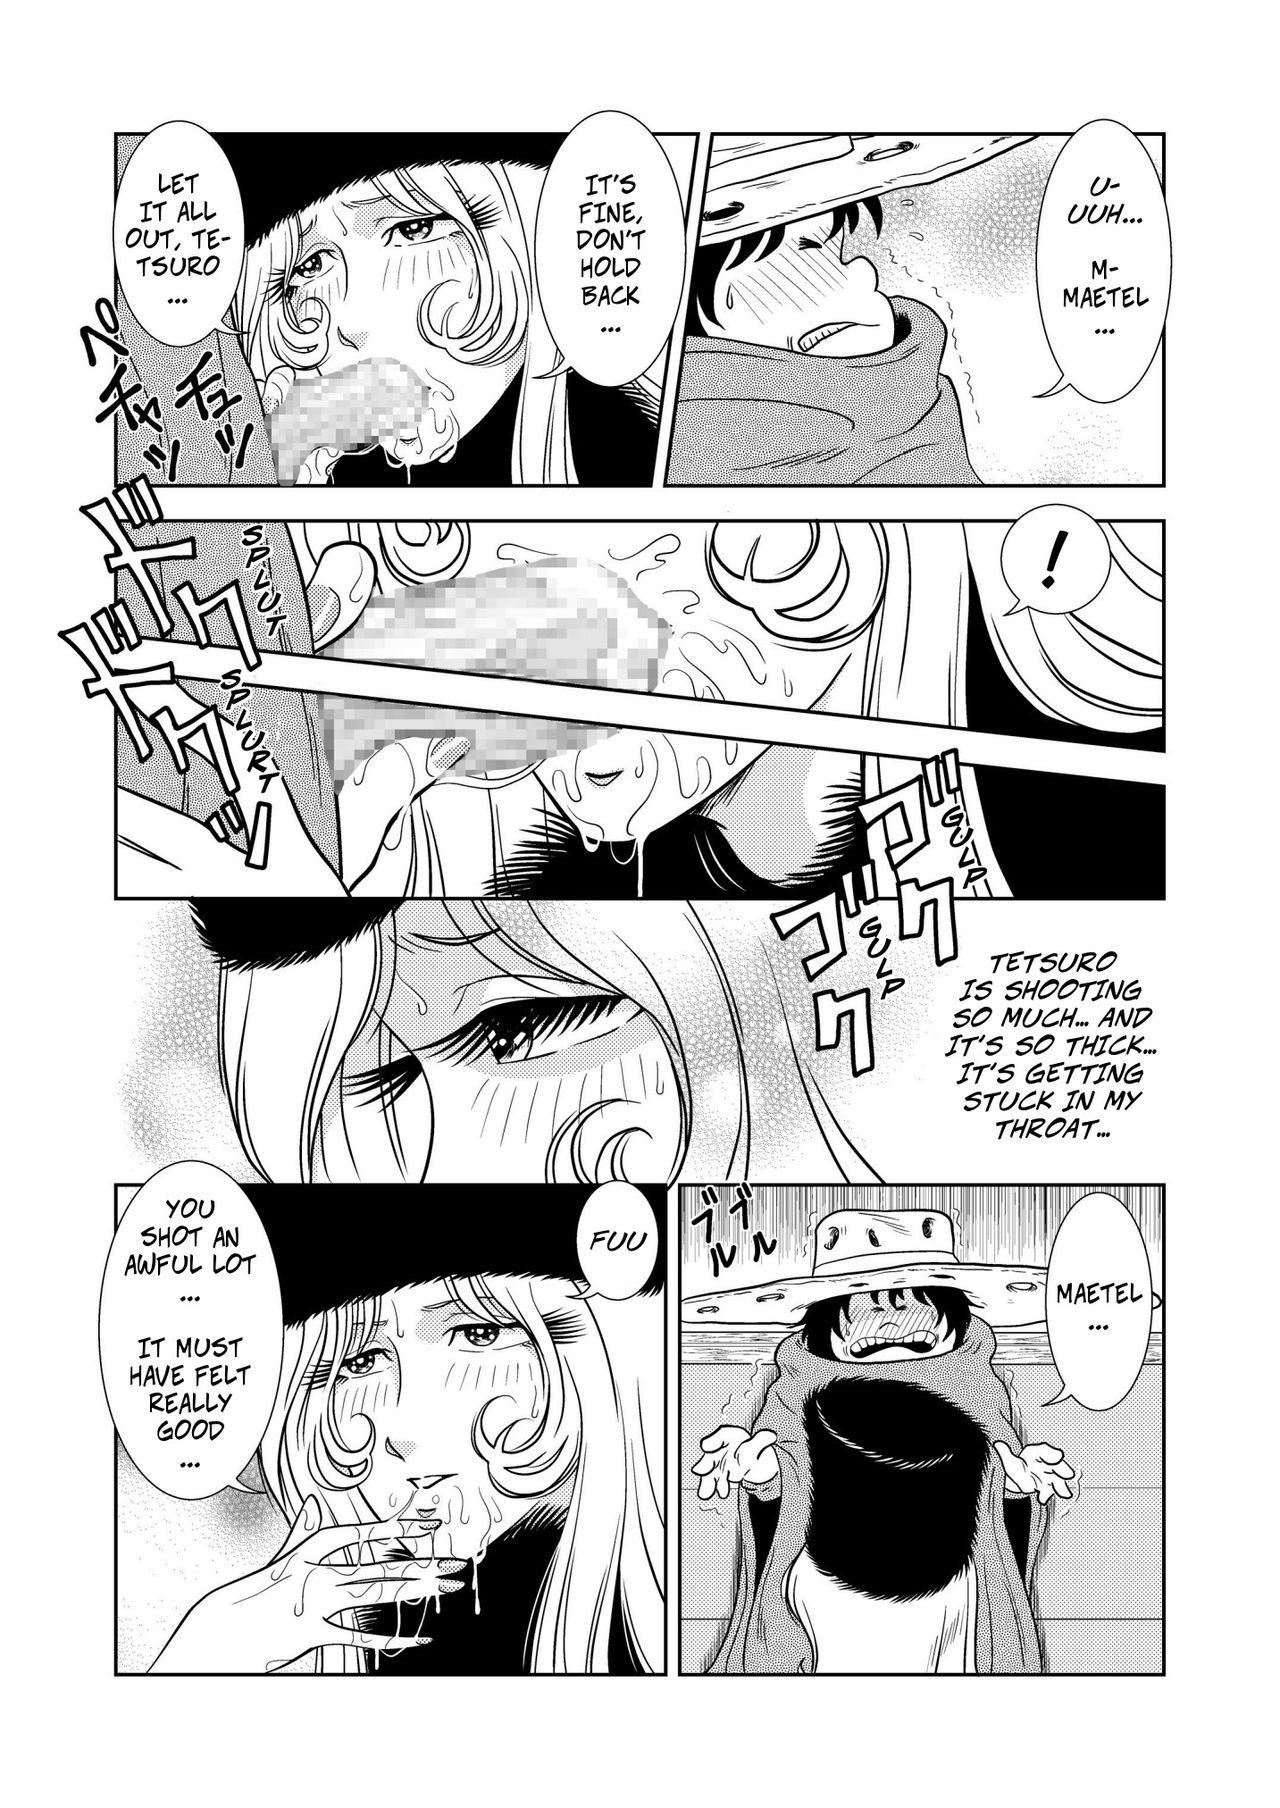 Licking Pussy Maetel Story 2 - Galaxy express 999 Vecina - Page 10